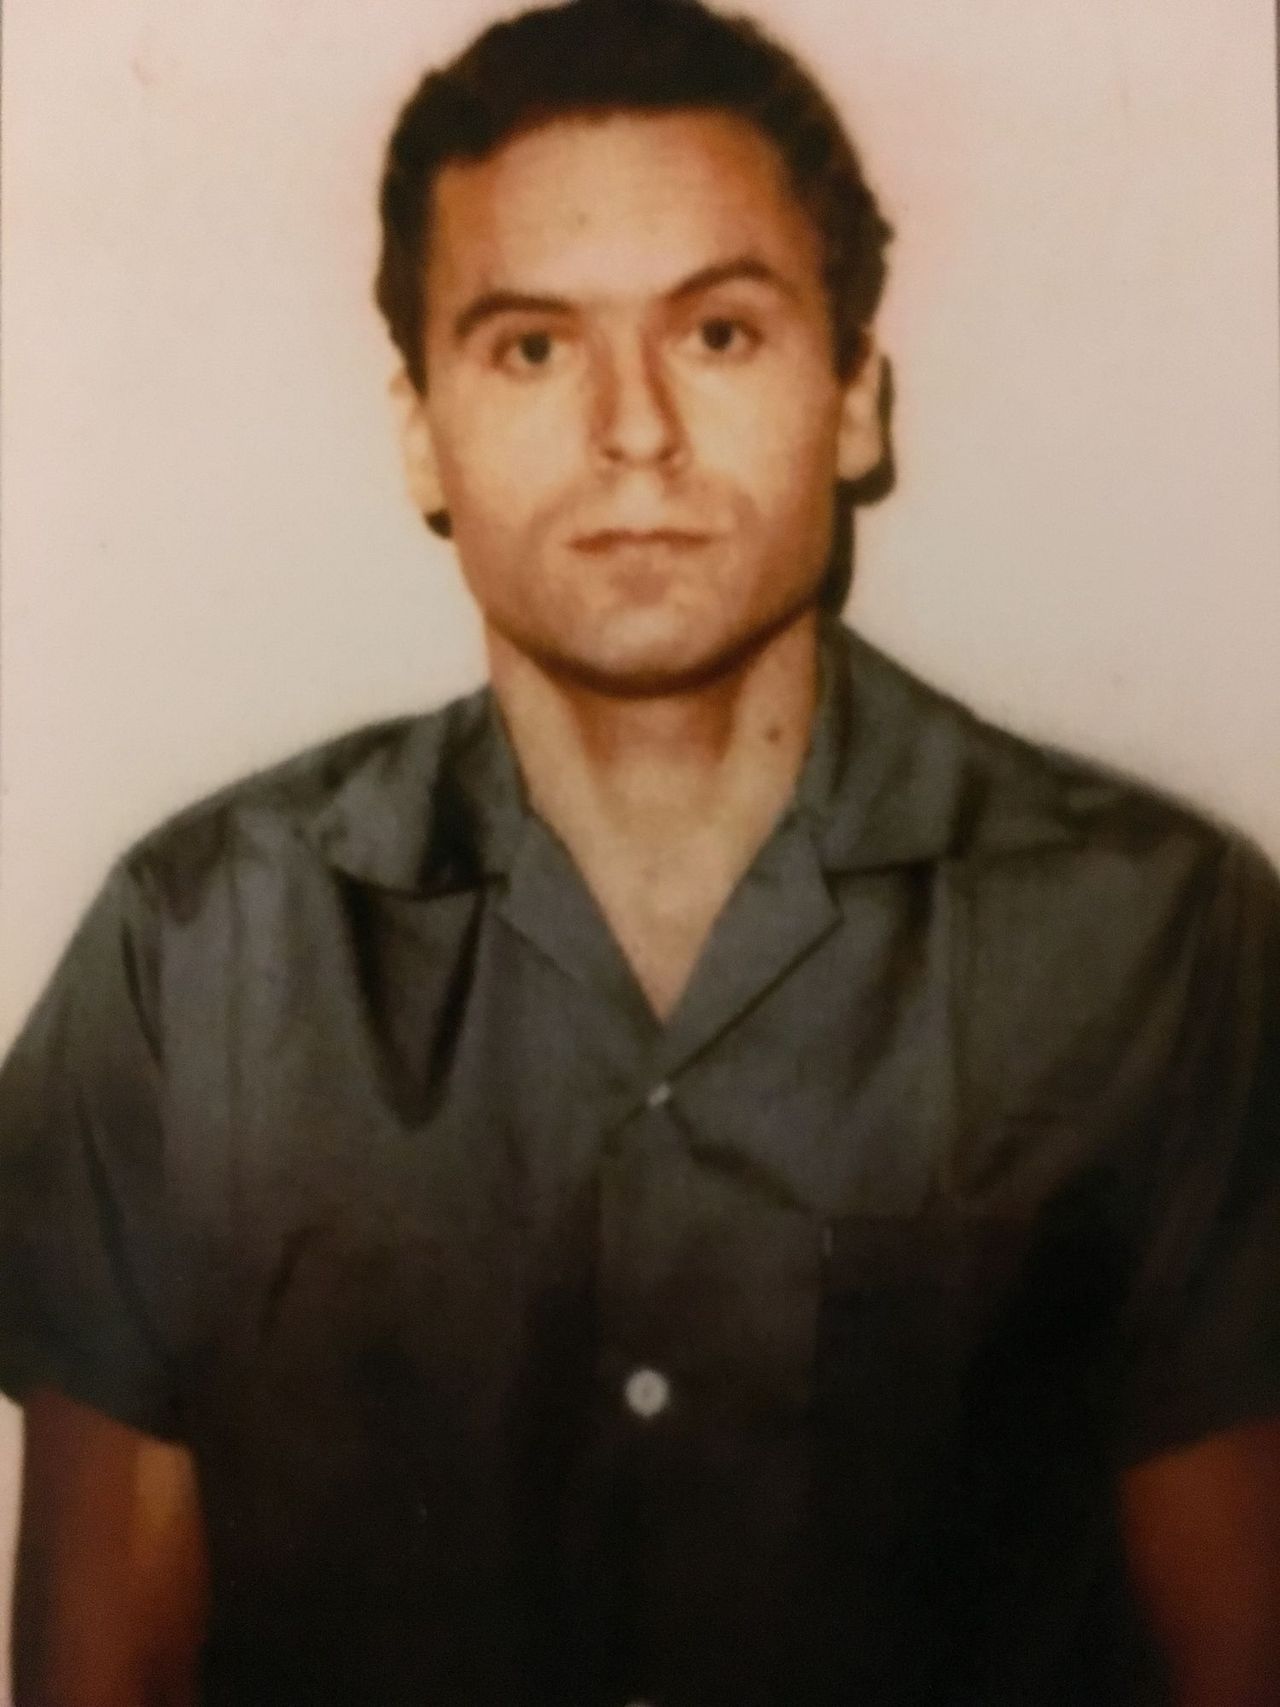 Ted Bundy first death row picture taken when he arrived at Florida